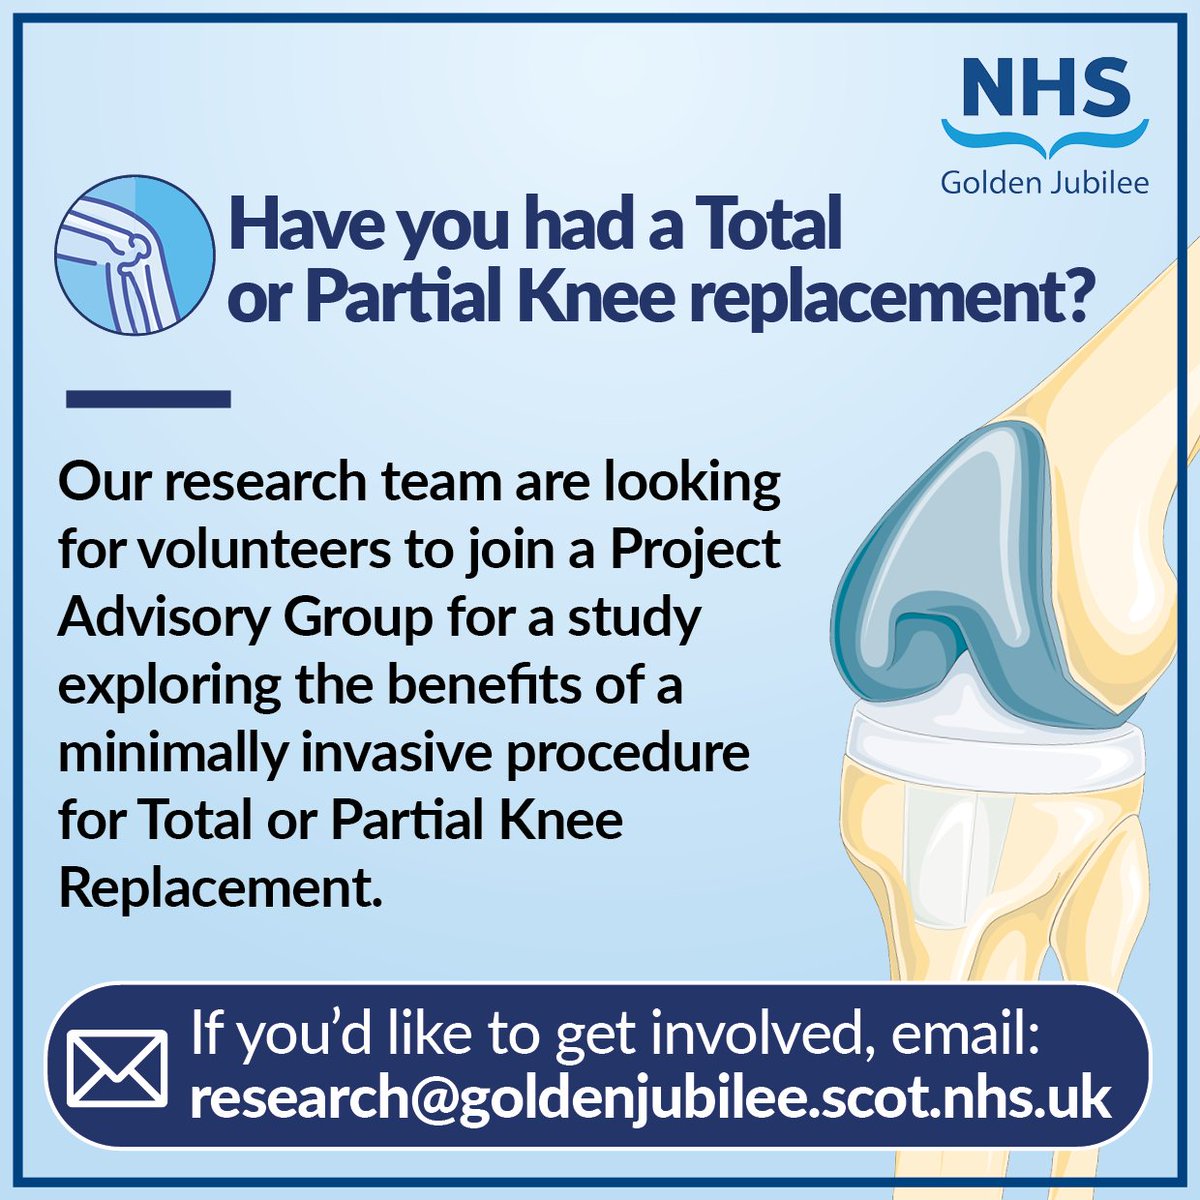 📣Have you had a total or partial knee replacement? Our Research team needs you! By working with our team, you will have the opportunity to contribute to the future of patient care. 📧Contact research@goldenjubilee.scot.nhs.ukfor more information.